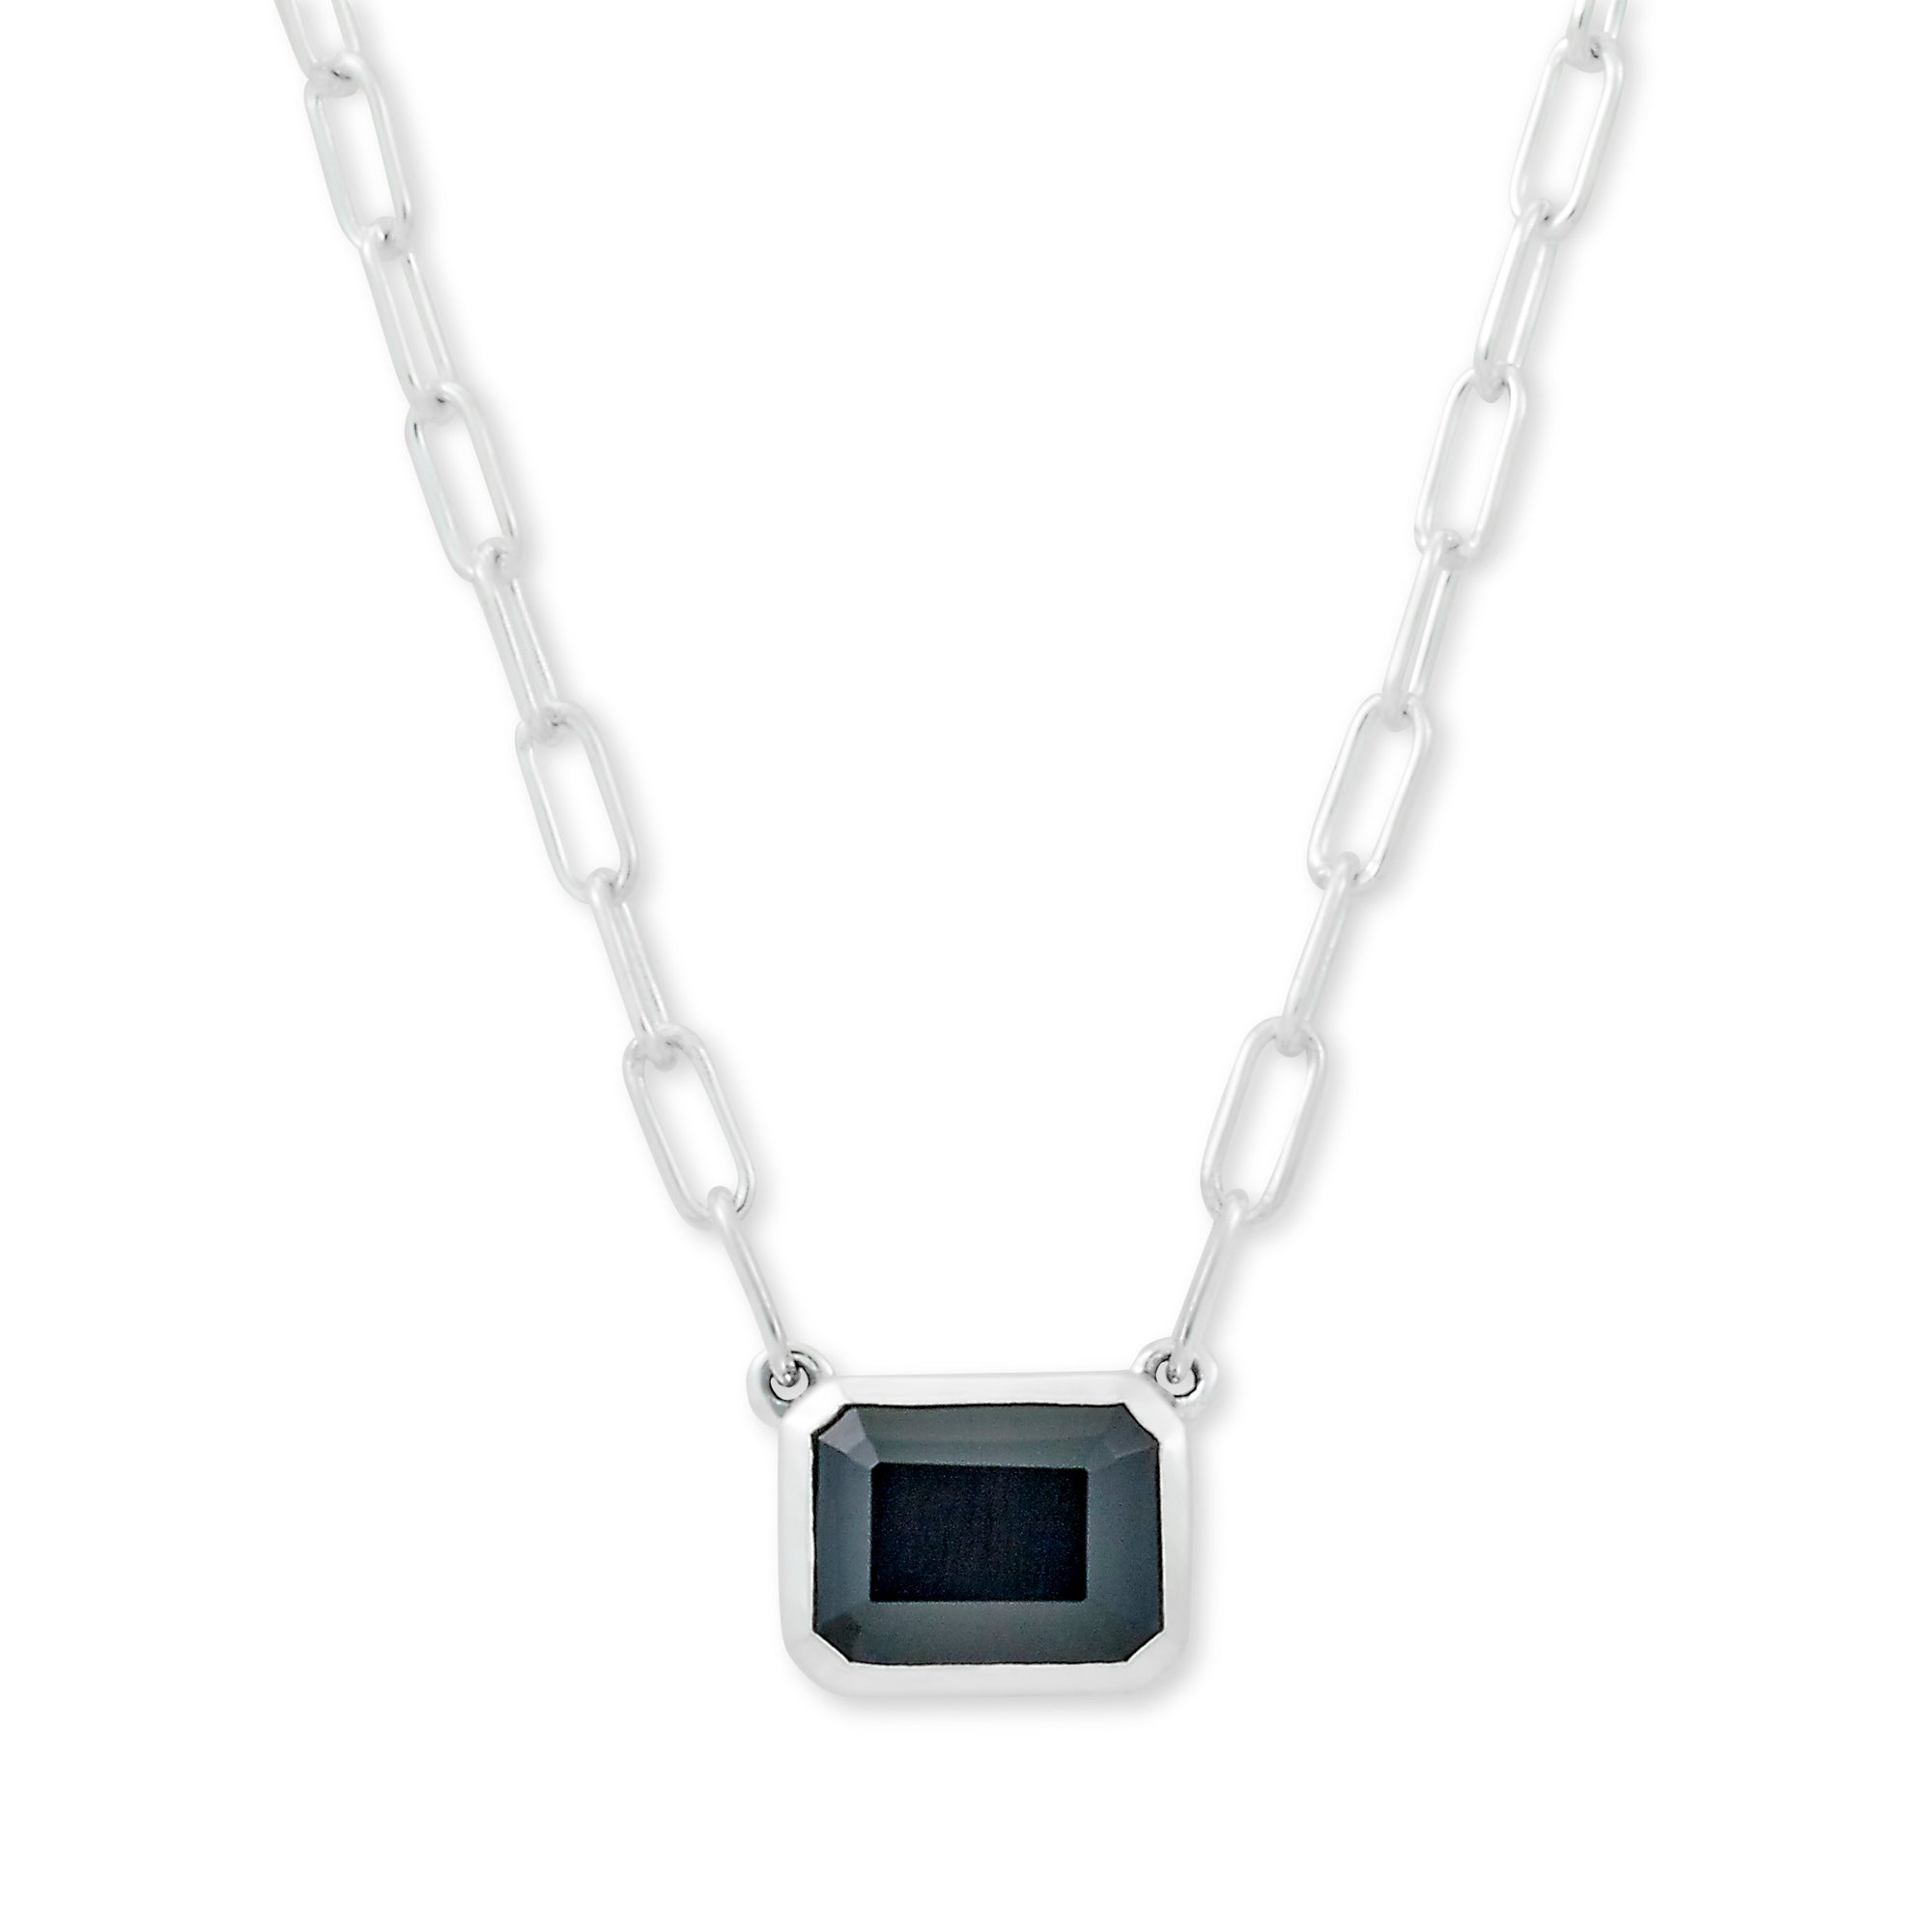 Black Spinel Eirini Necklace available at Talisman Collection Fine Jewelers in El Dorado Hills, CA and online. Specs: Black Spinel Eirini Necklace features an emerald-cut black spinel solitaire measuring 7x9mm, and is set in Sterling Silver. 